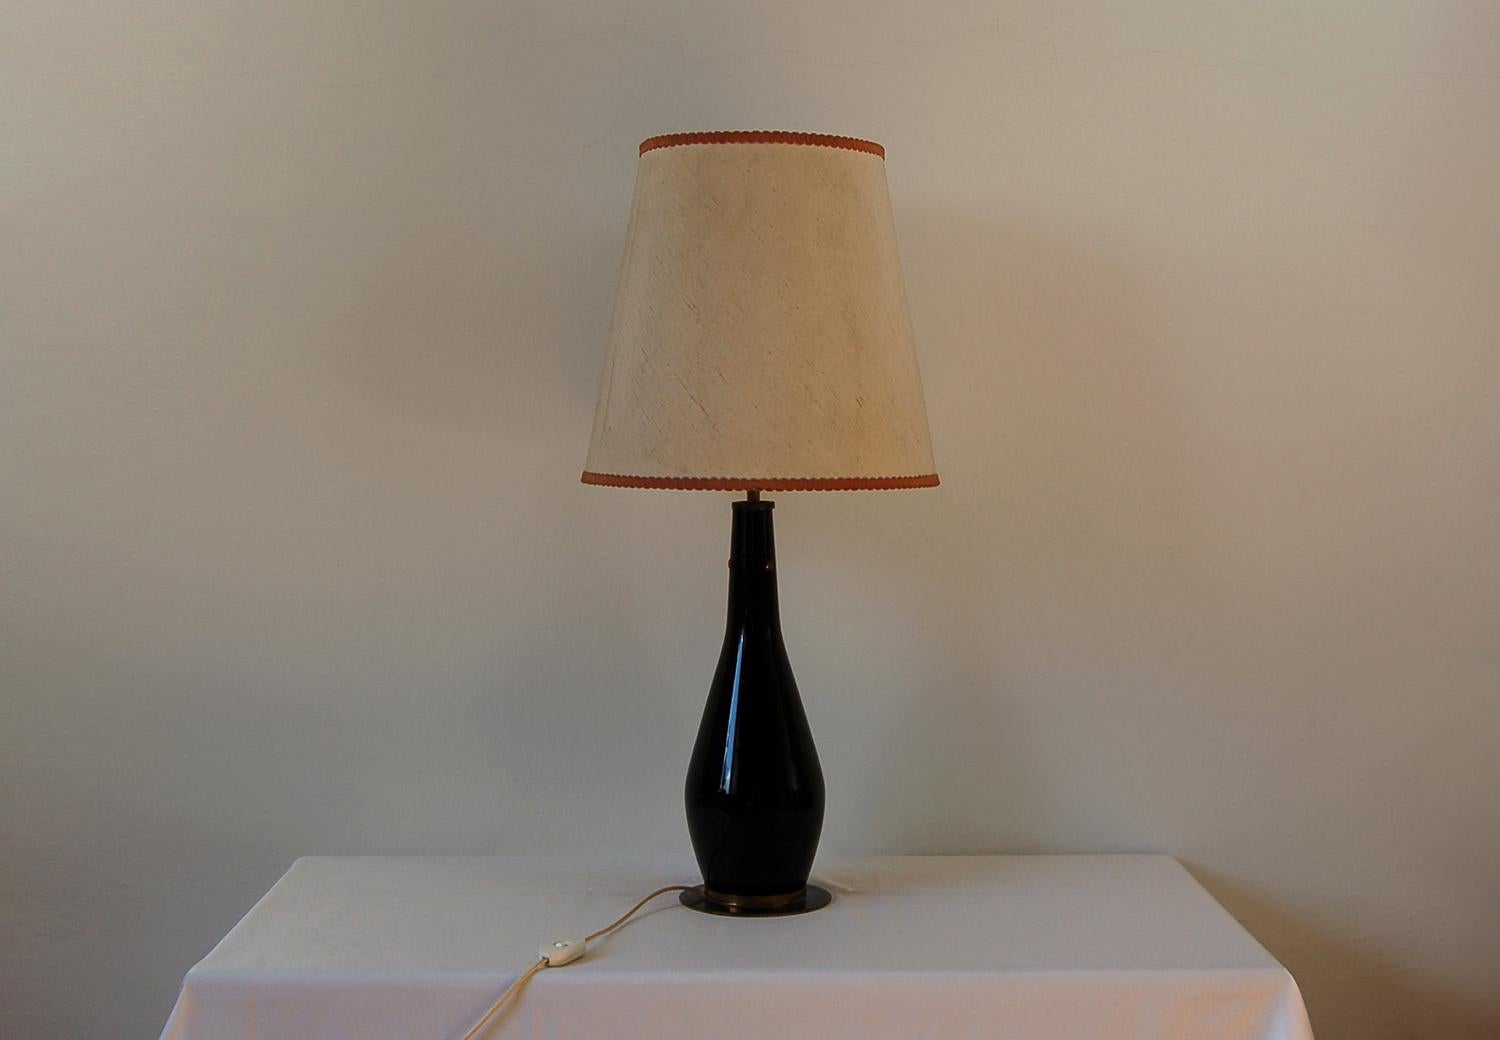 Midcentury table lamp with structure in black glass and brass and lampshade in fabric. Produced by the Italian company Stilnovo during the 1950s.

The manufacturer's logo is stamped on the light switch.

For this lamp it can be used an E27